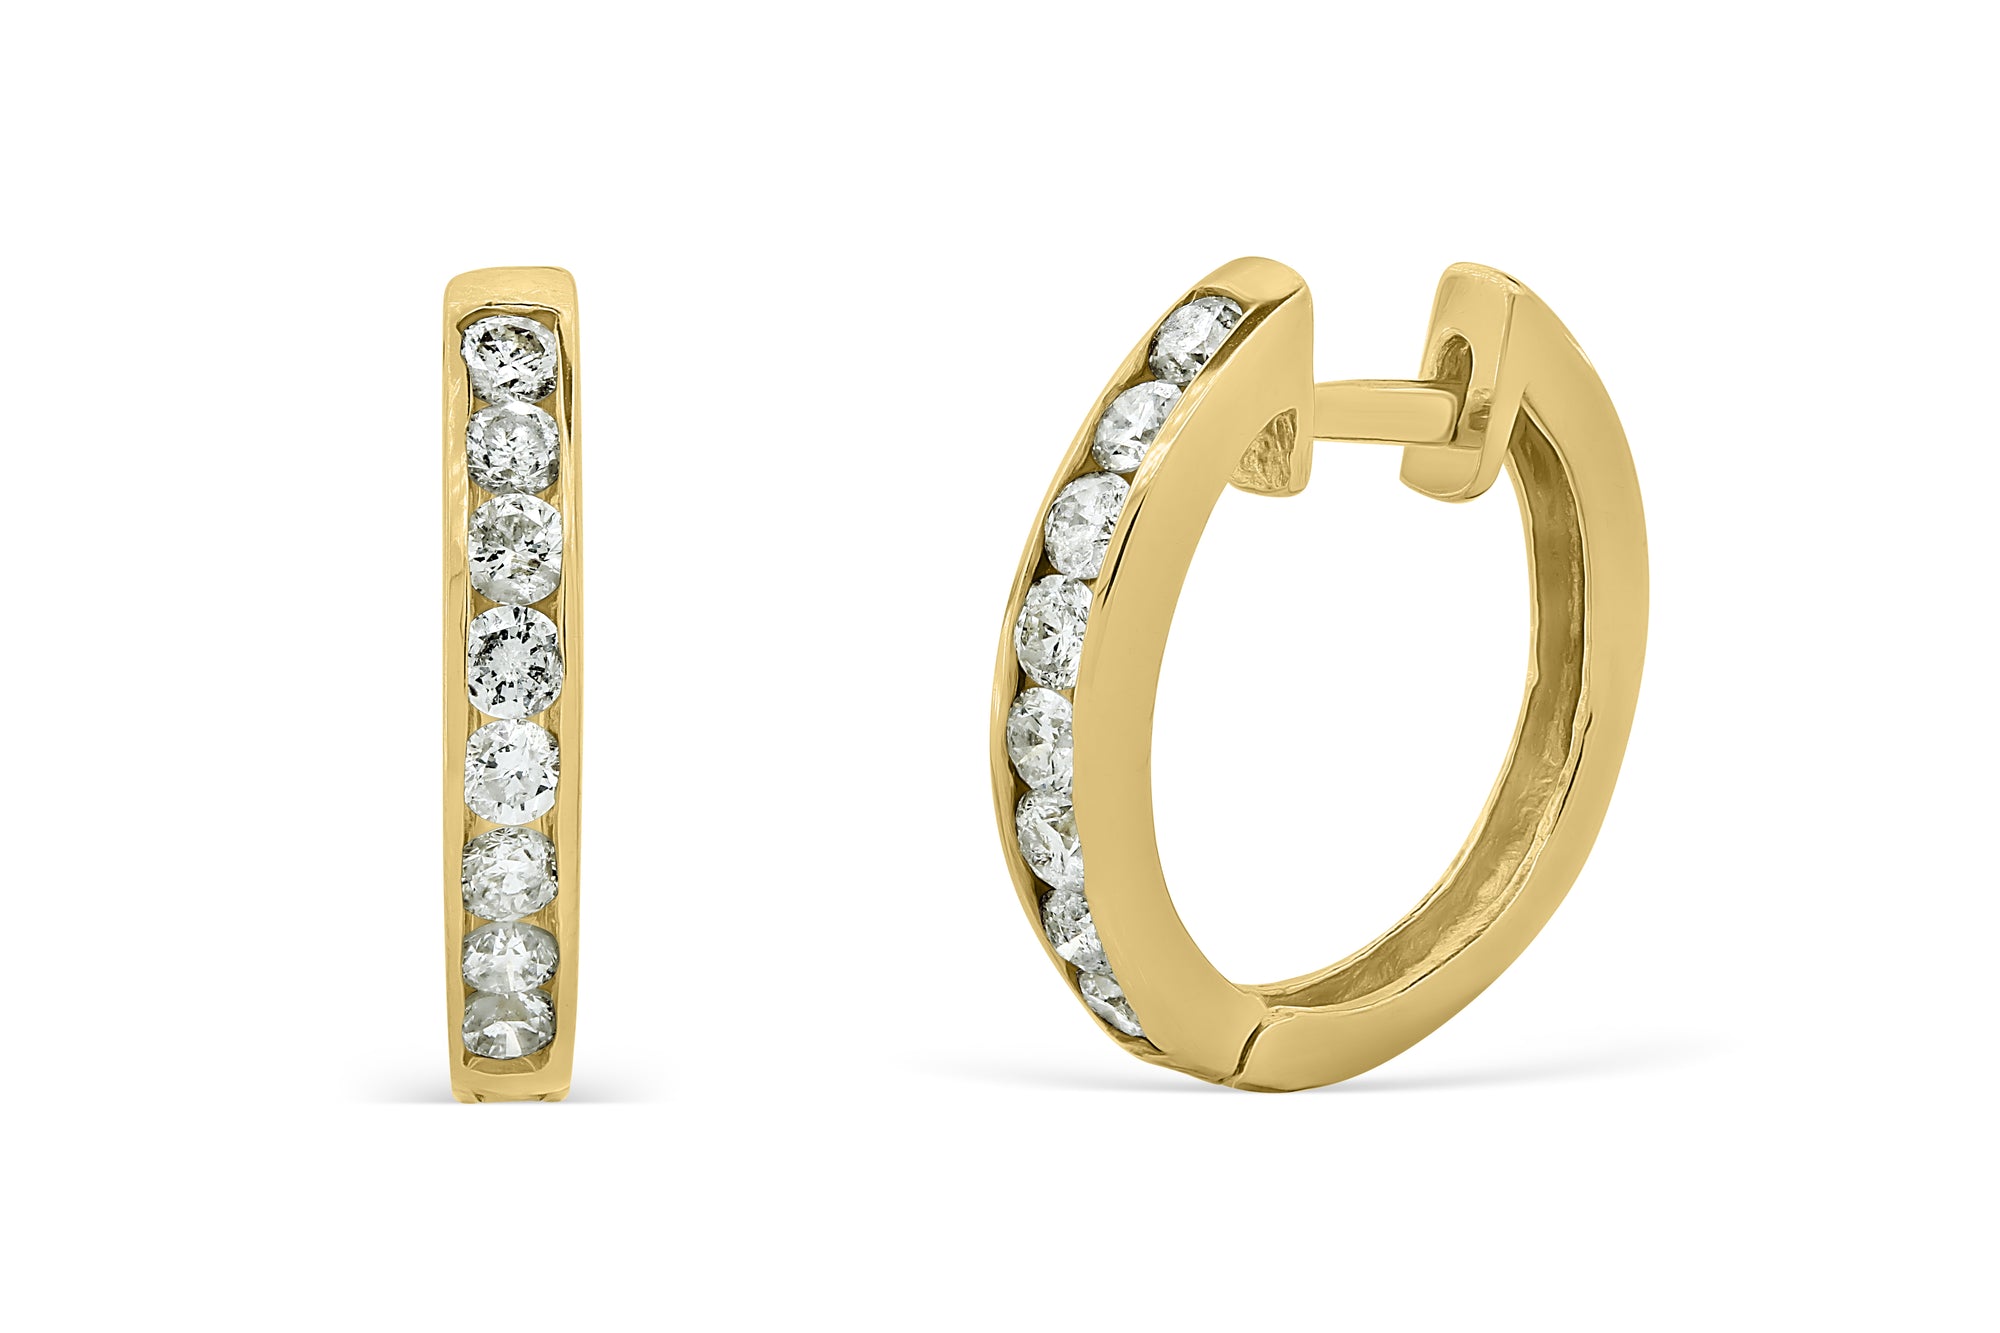 0.41 CT TW Round Diamond Hoop Earrings 14K Yellow Gold DER007 - NorthandSouthJewelry